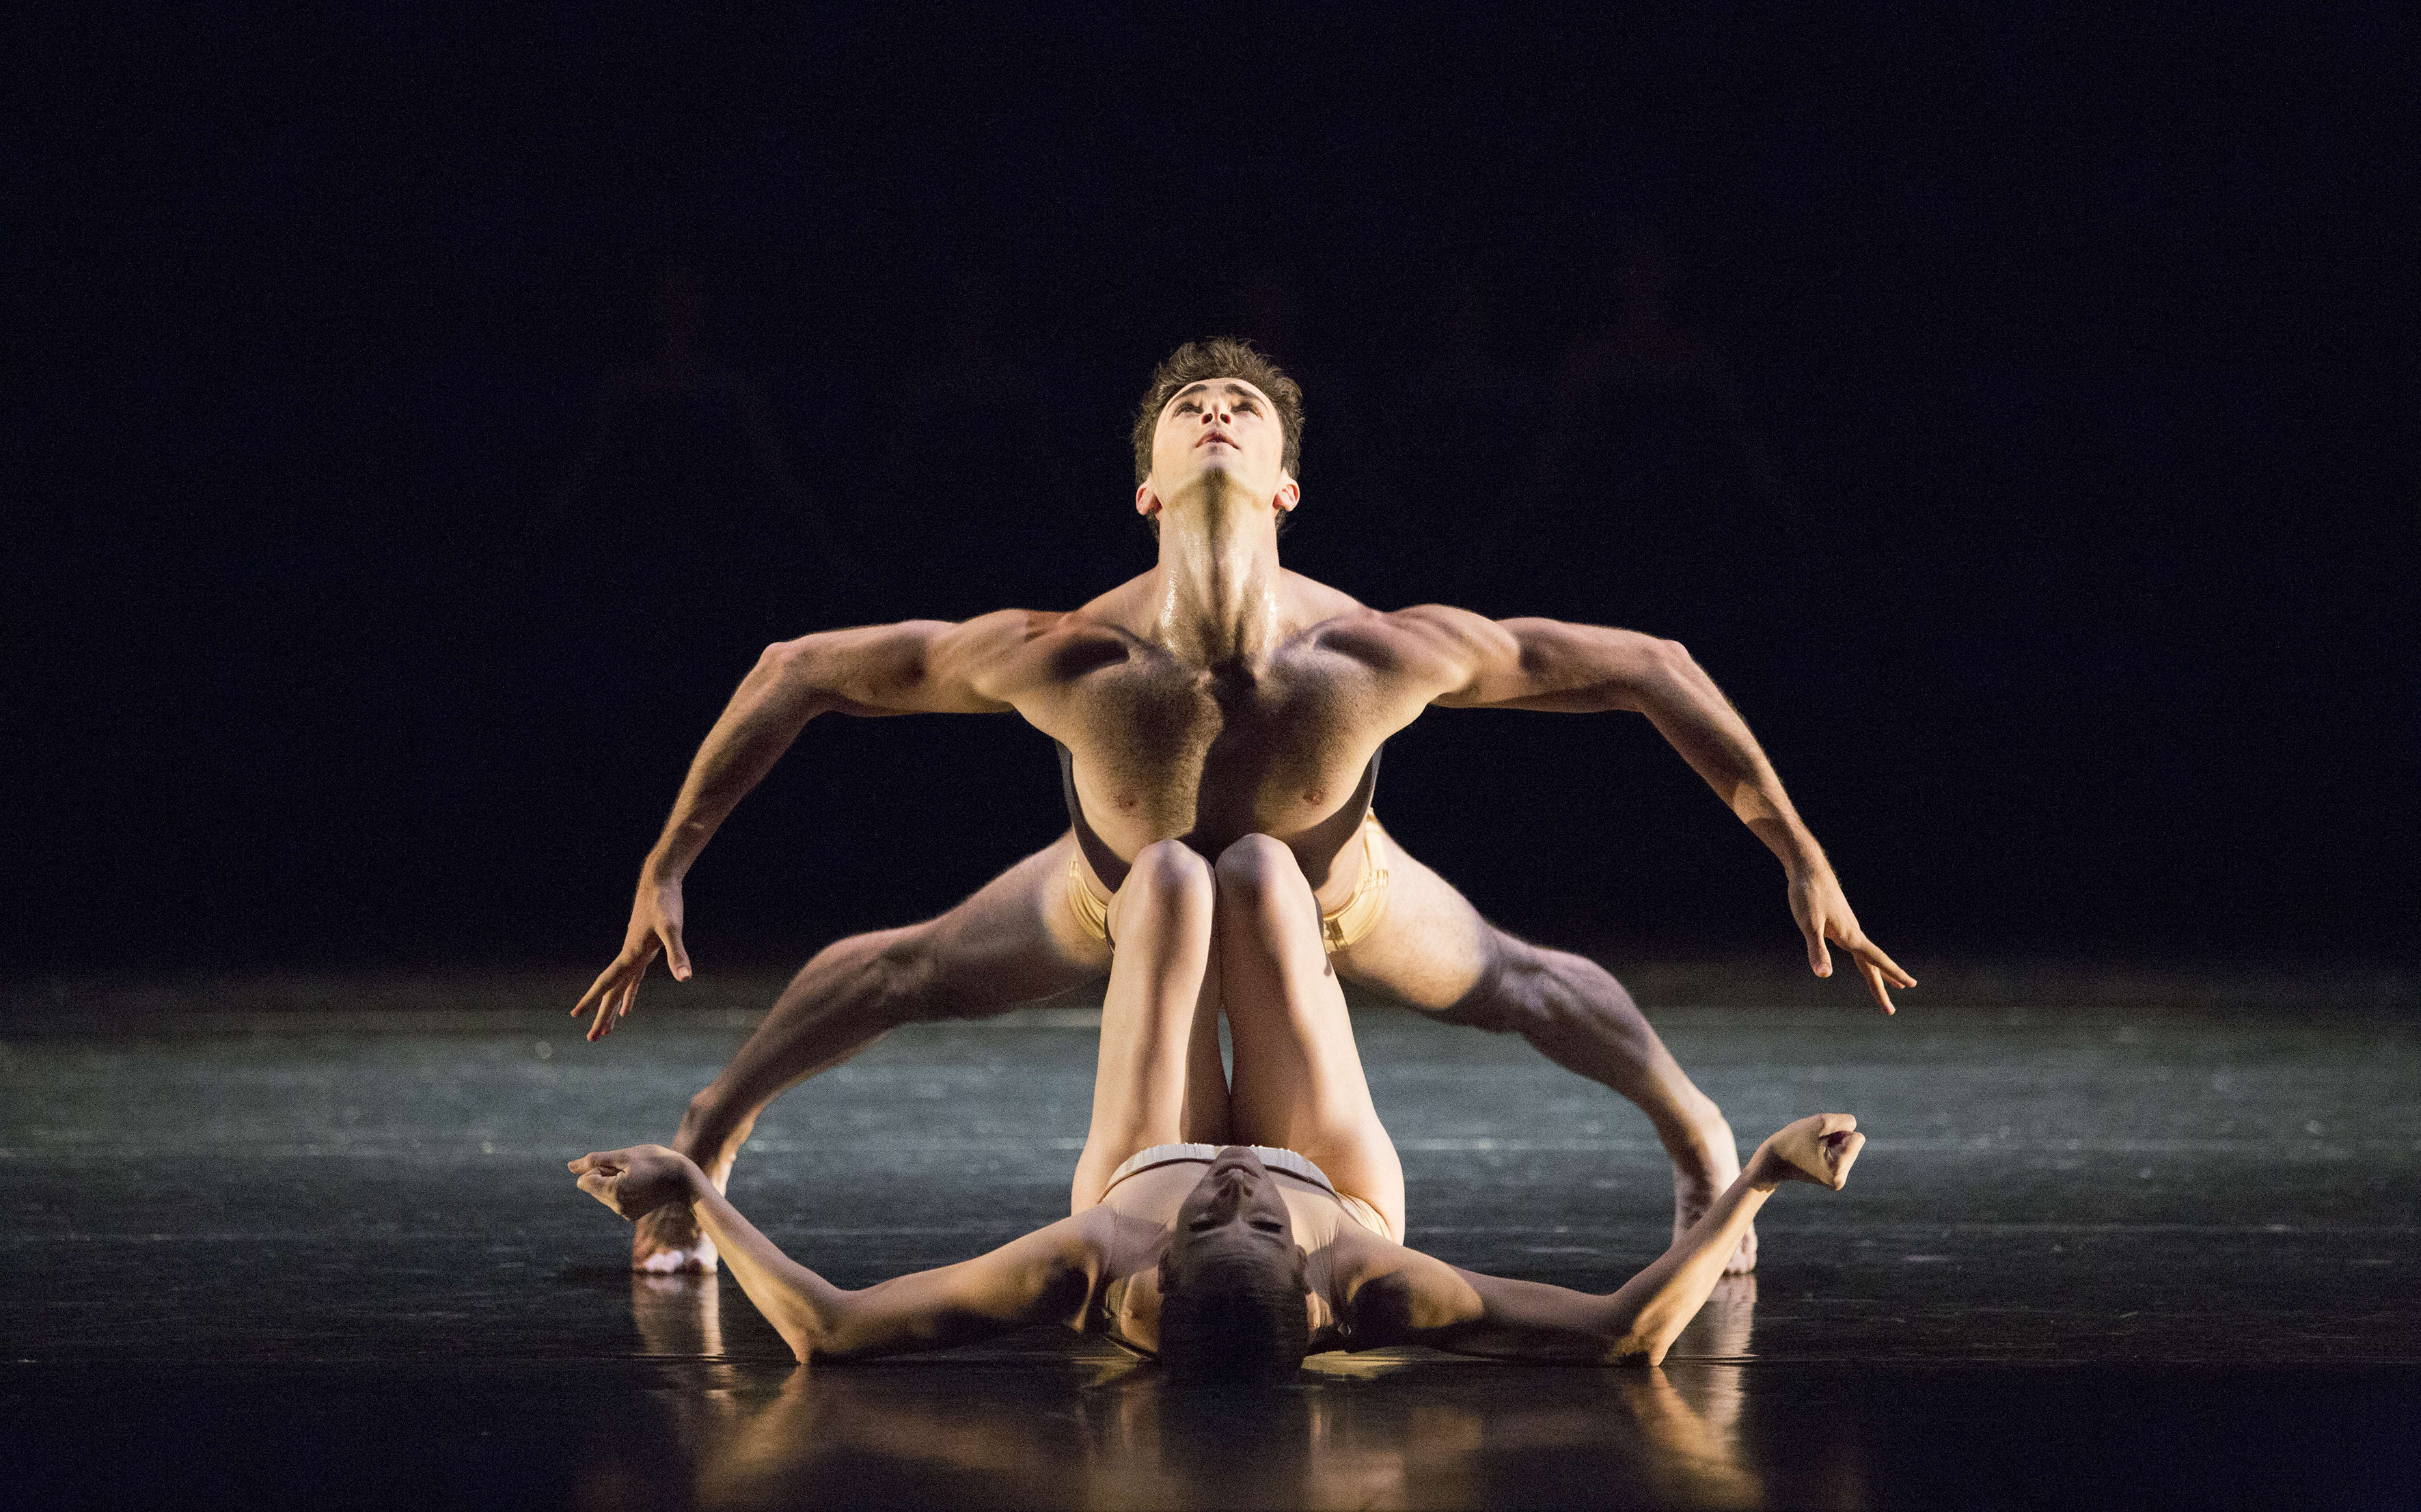 The Australian Ballet Petite Mort with dancers Alice Topp and Christiano Martino